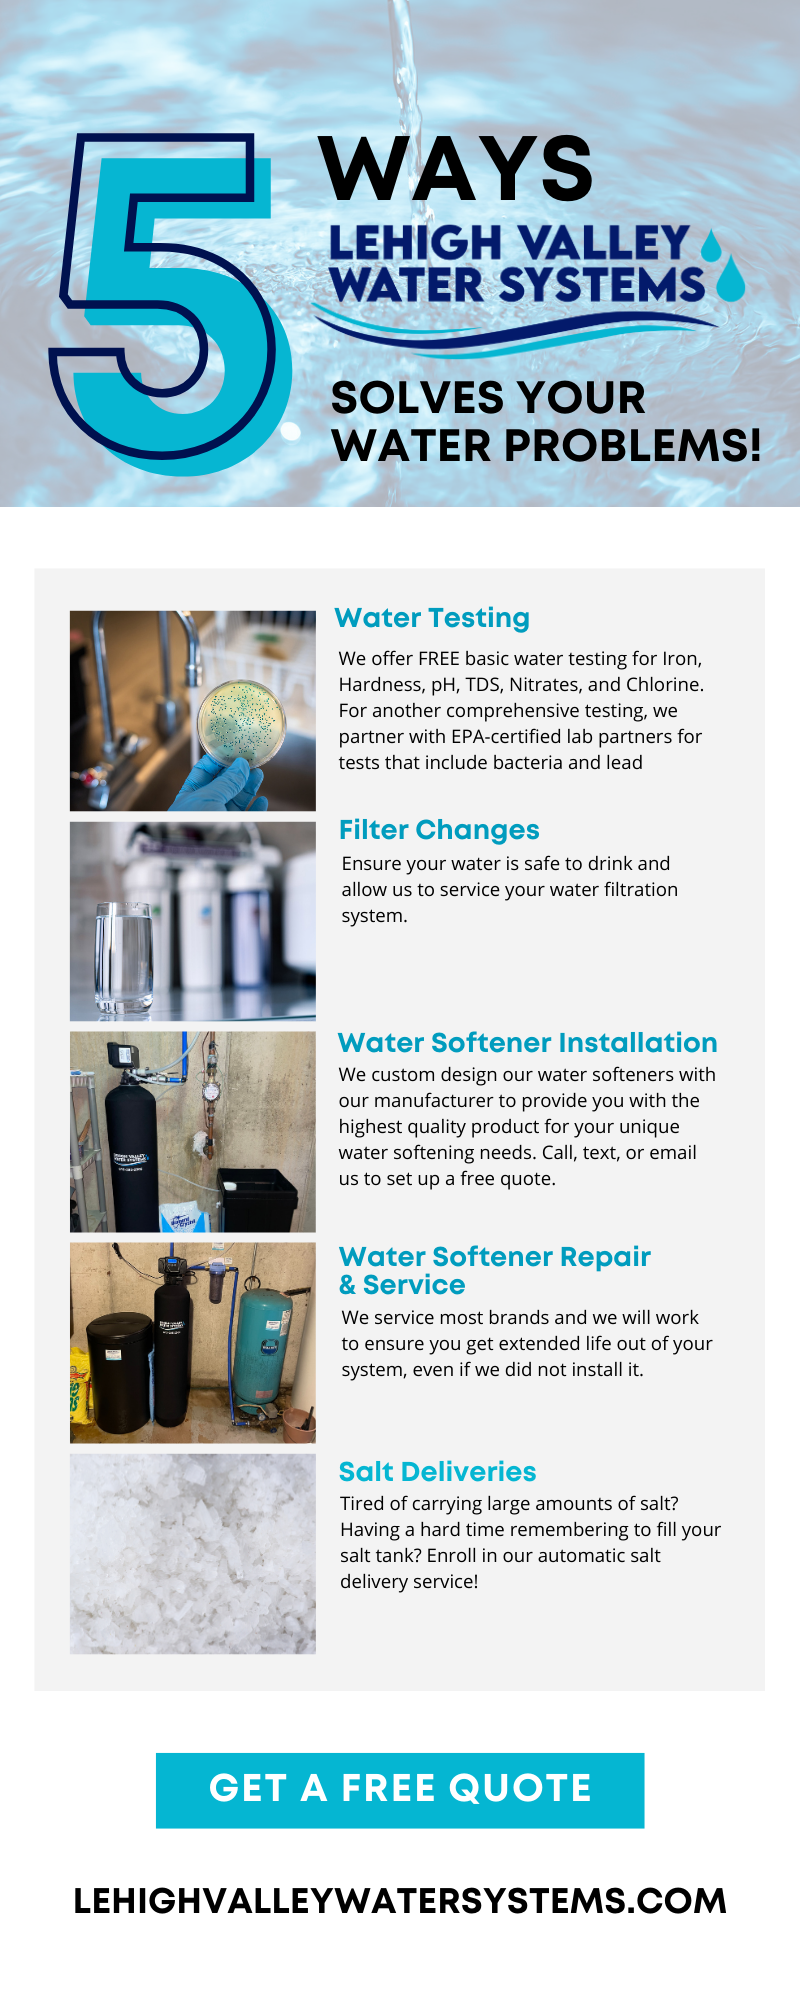 Five Ways We Solve Your Water Problems! 3